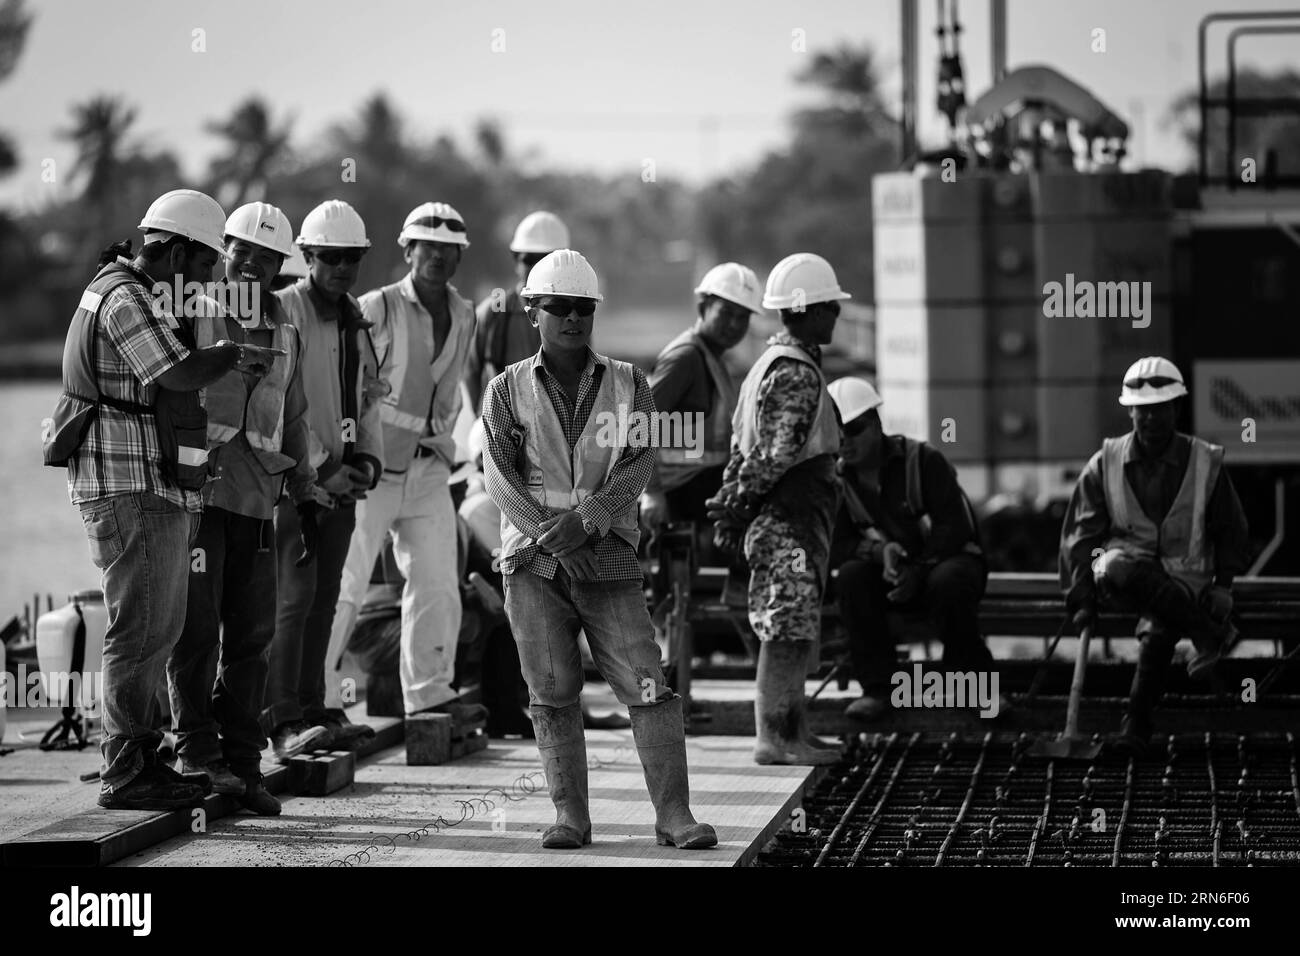 TUXPAN, July 22, 2015 -- Image taken on July 22, 2015 shows a group of employees from China and Mexico working at the construction site of the Tuxpan Port Terminal in Tuxpan city, Veracruz state, Mexico. Around 90 employees from China and 100 from Mexico have been working for a year in the construction site of the port terminal for containers, vehicles and agricultural material. This is the second construction project made by Chinese company with labor from Chinese and Mexican origins.Pedro Mera) (fnc) MEXICO-TUXPAN-CHINA-INDUSTRY-PORT-FEATURE e PedroxMera PUBLICATIONxNOTxINxCHN   Tuxpan July Stock Photo